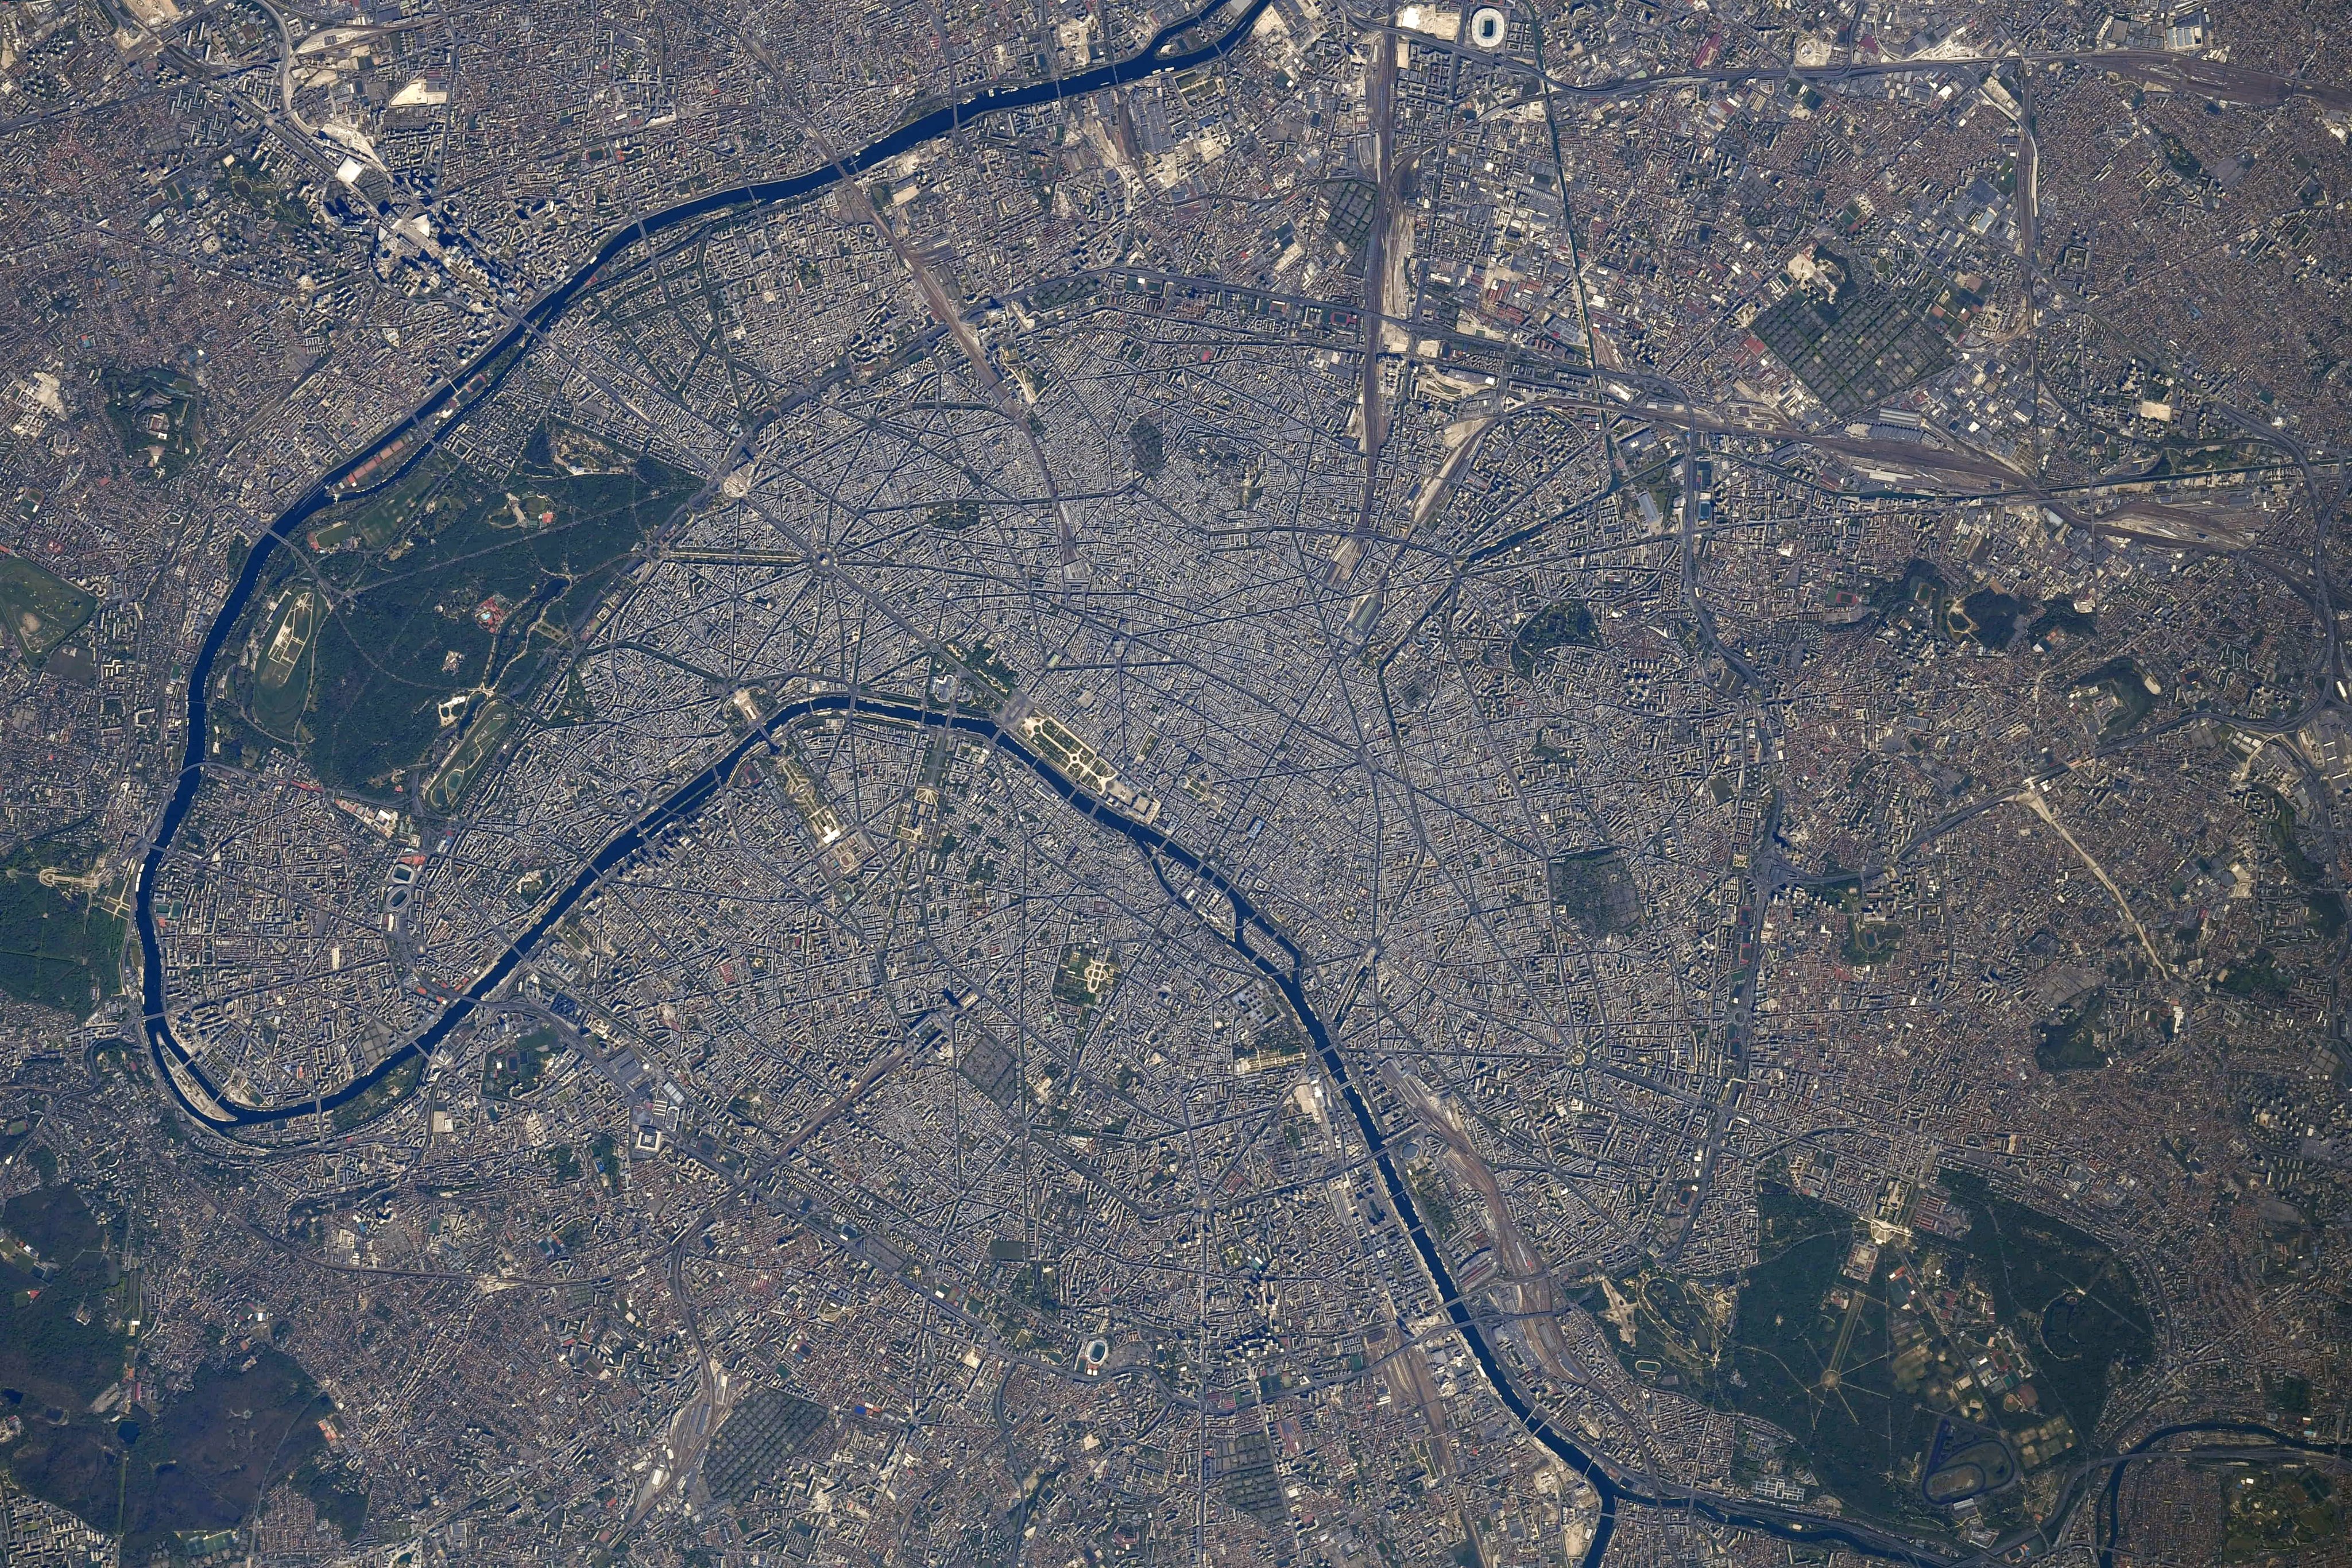 General 4096x2731 Paris satellite photo France urban city cityscape satellite imagery top view aerial view